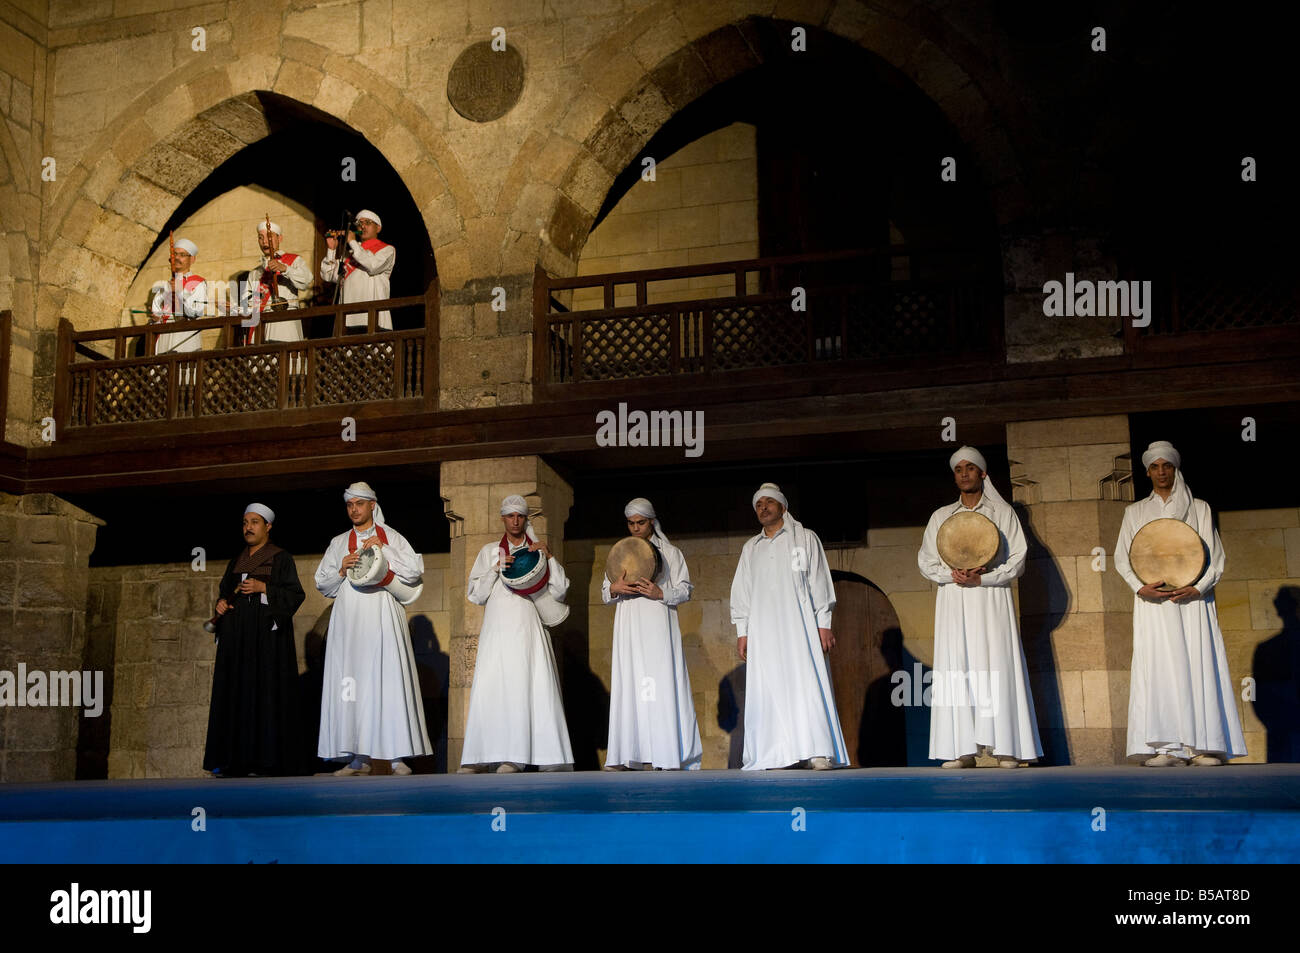 Dervish or Darvish performance of al tannoura Egyptian heritage dance troupe at the Wekalet el Ghouri Arts Center in Old Cairo Egypt Stock Photo